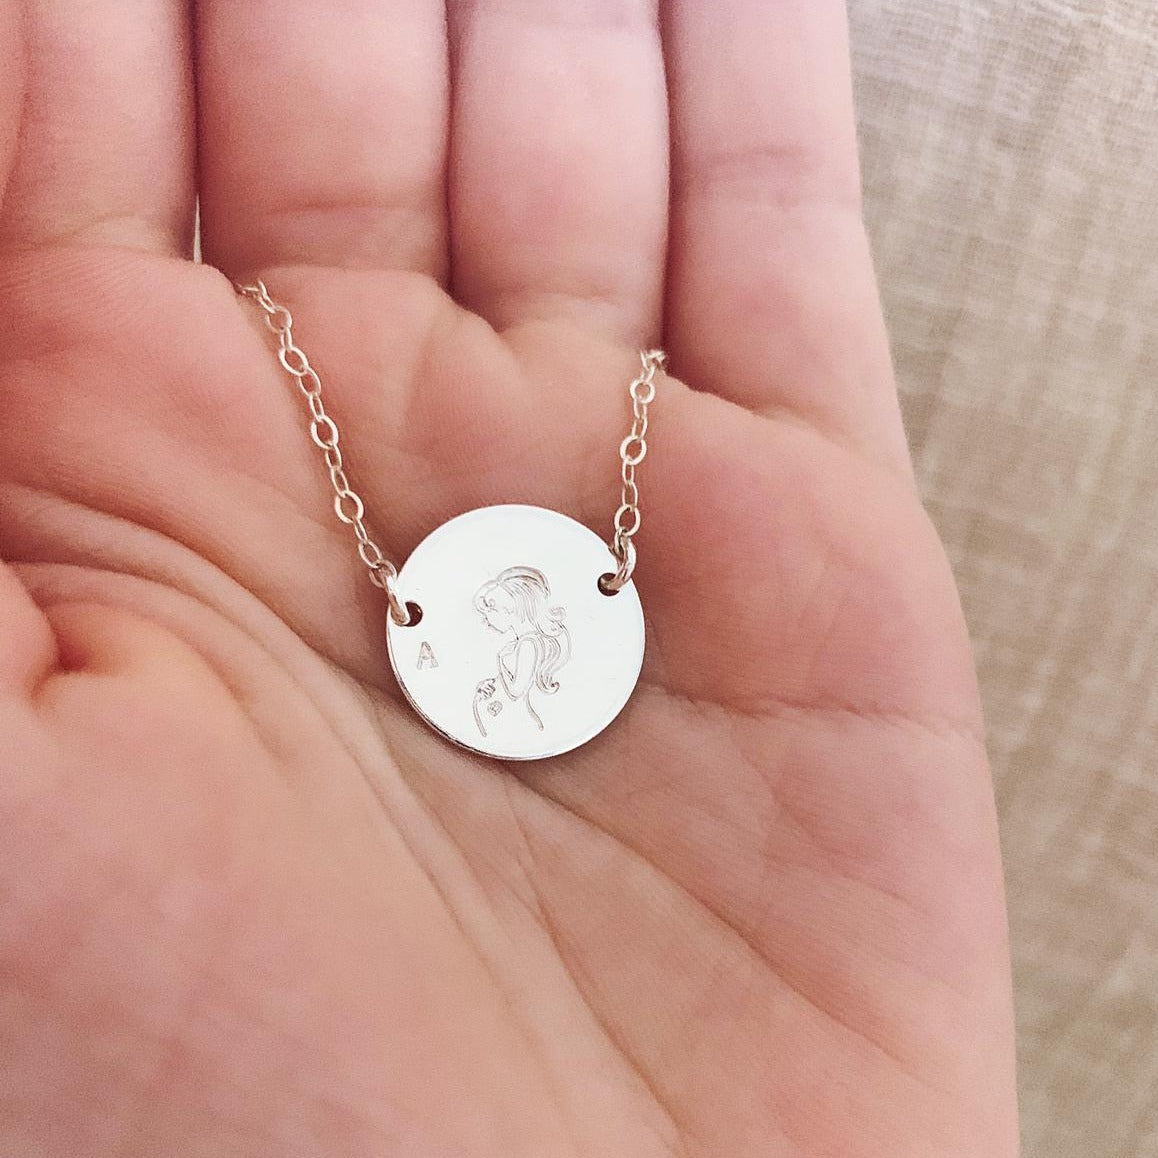 Pregnant Mama Disc Necklace - Large Disc